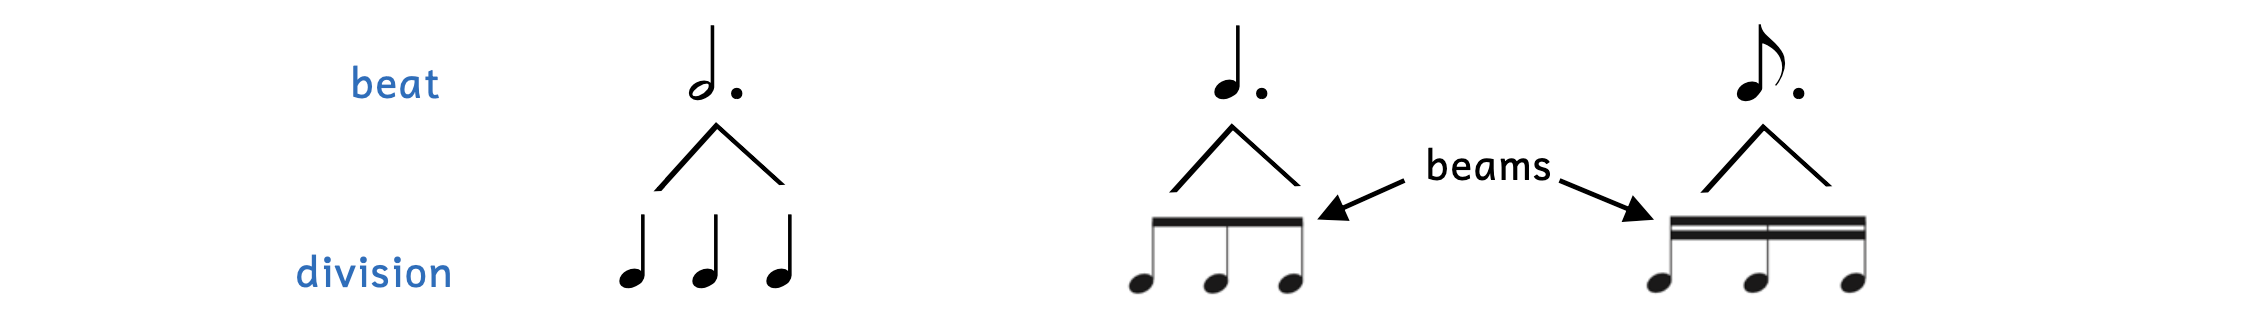 Examples of beats divided into groups of three. The dotted half note is equally divided into three quarter notes. The dotted quarter note is equally divided into three eighth notes, which are beamed together with a single beam. The dotted eighth note is equally divided into three sixteenth notes, which are beamed together with two beams.